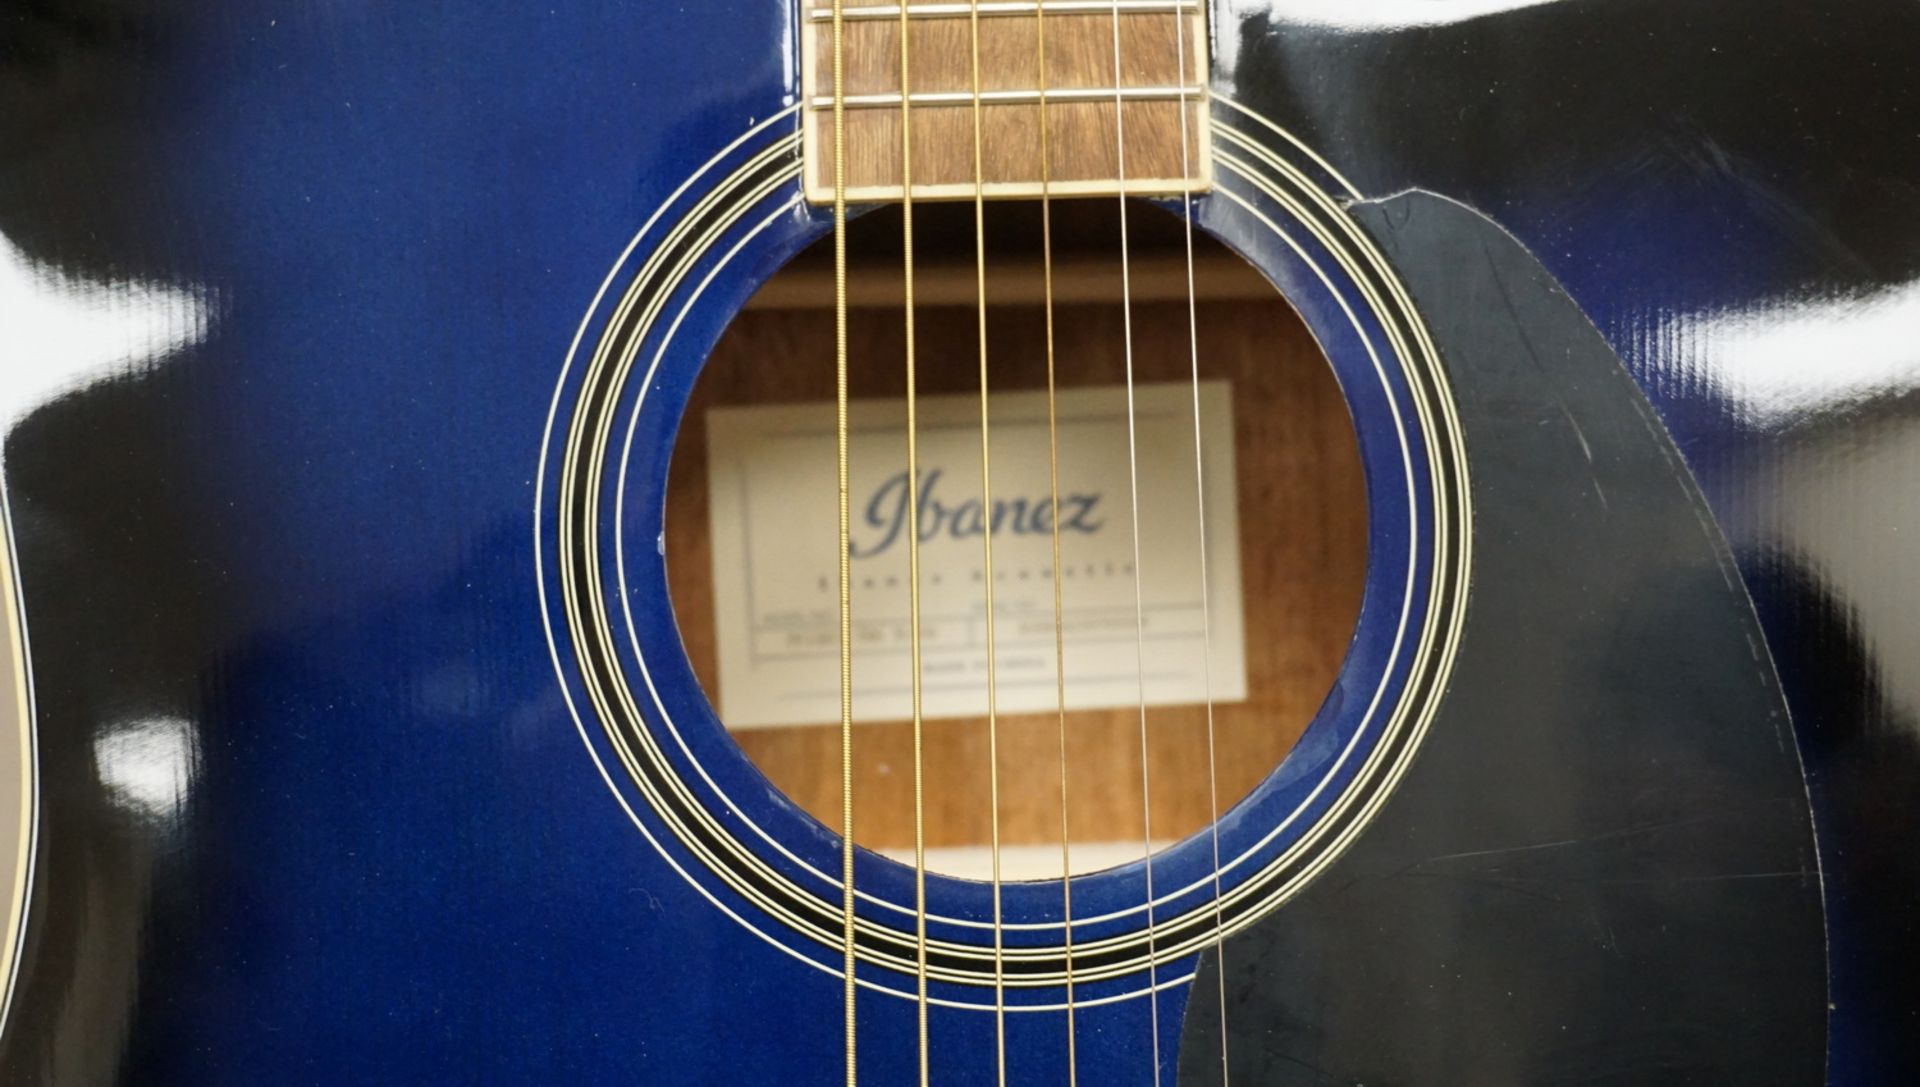 IBANEZ PF15ECE-TBS ACOUSTIC GUITAR W/ HARD CASE - Image 2 of 3